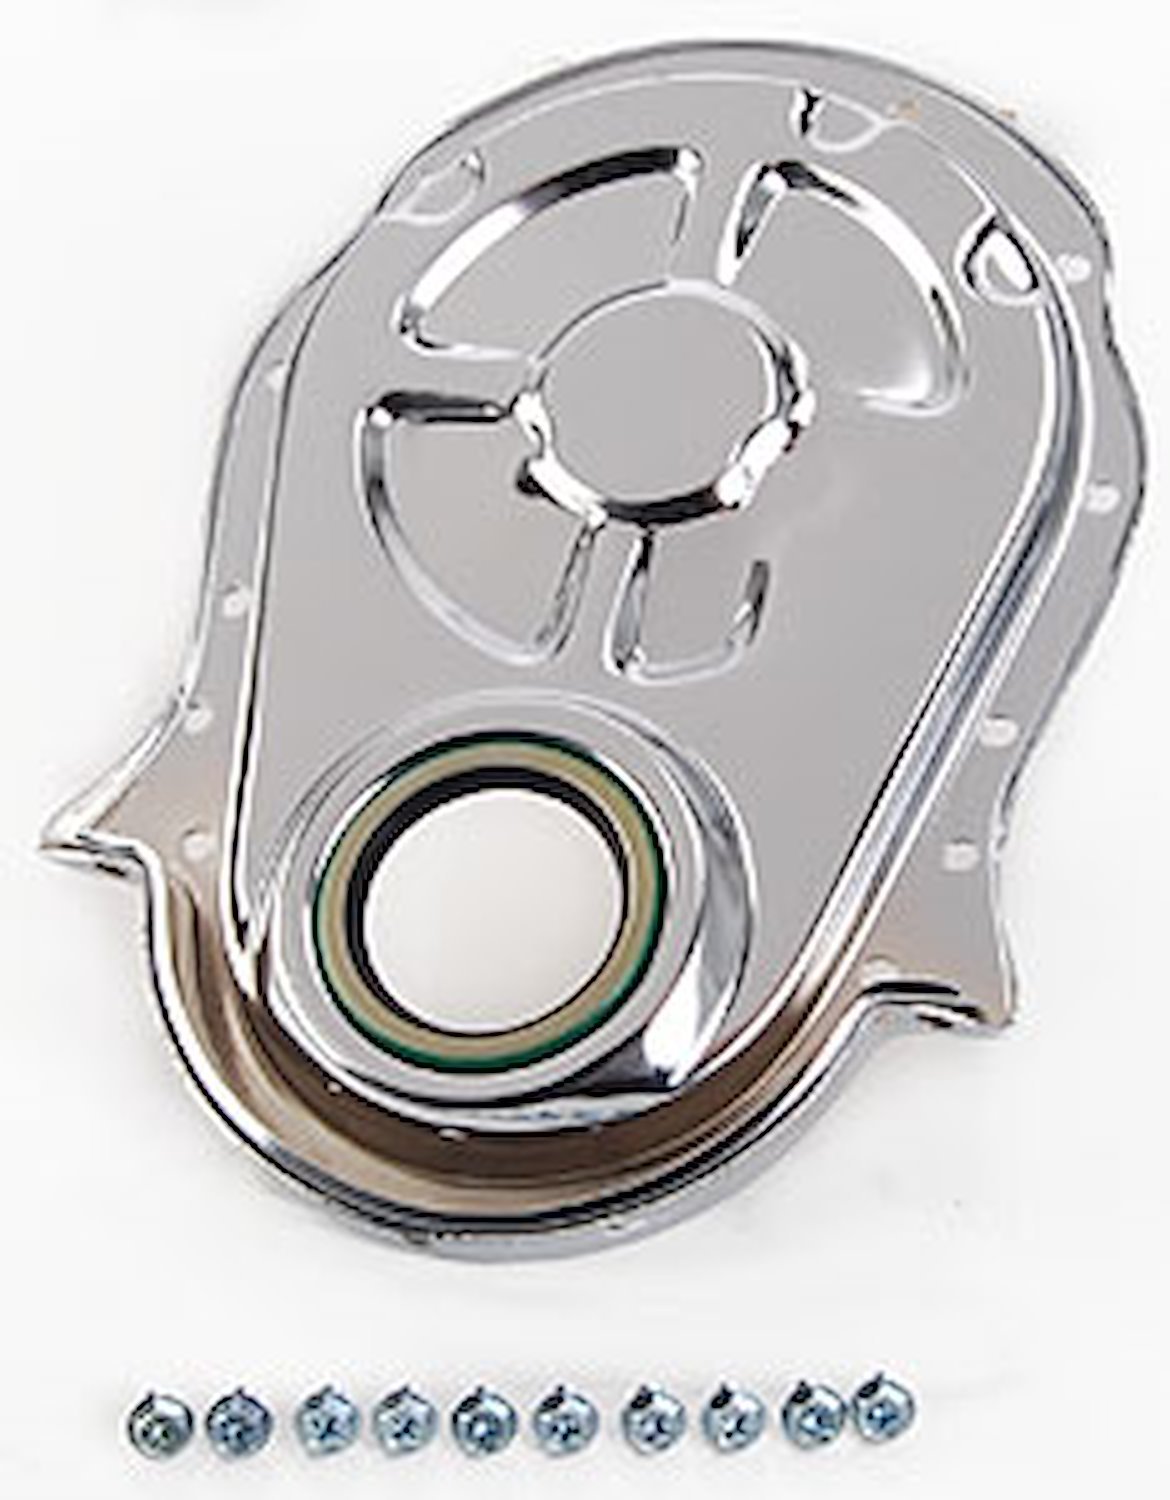 Chrome Timing Chain Cover for 1965-1990 Big Block Chevy Mark IV 396-454ci